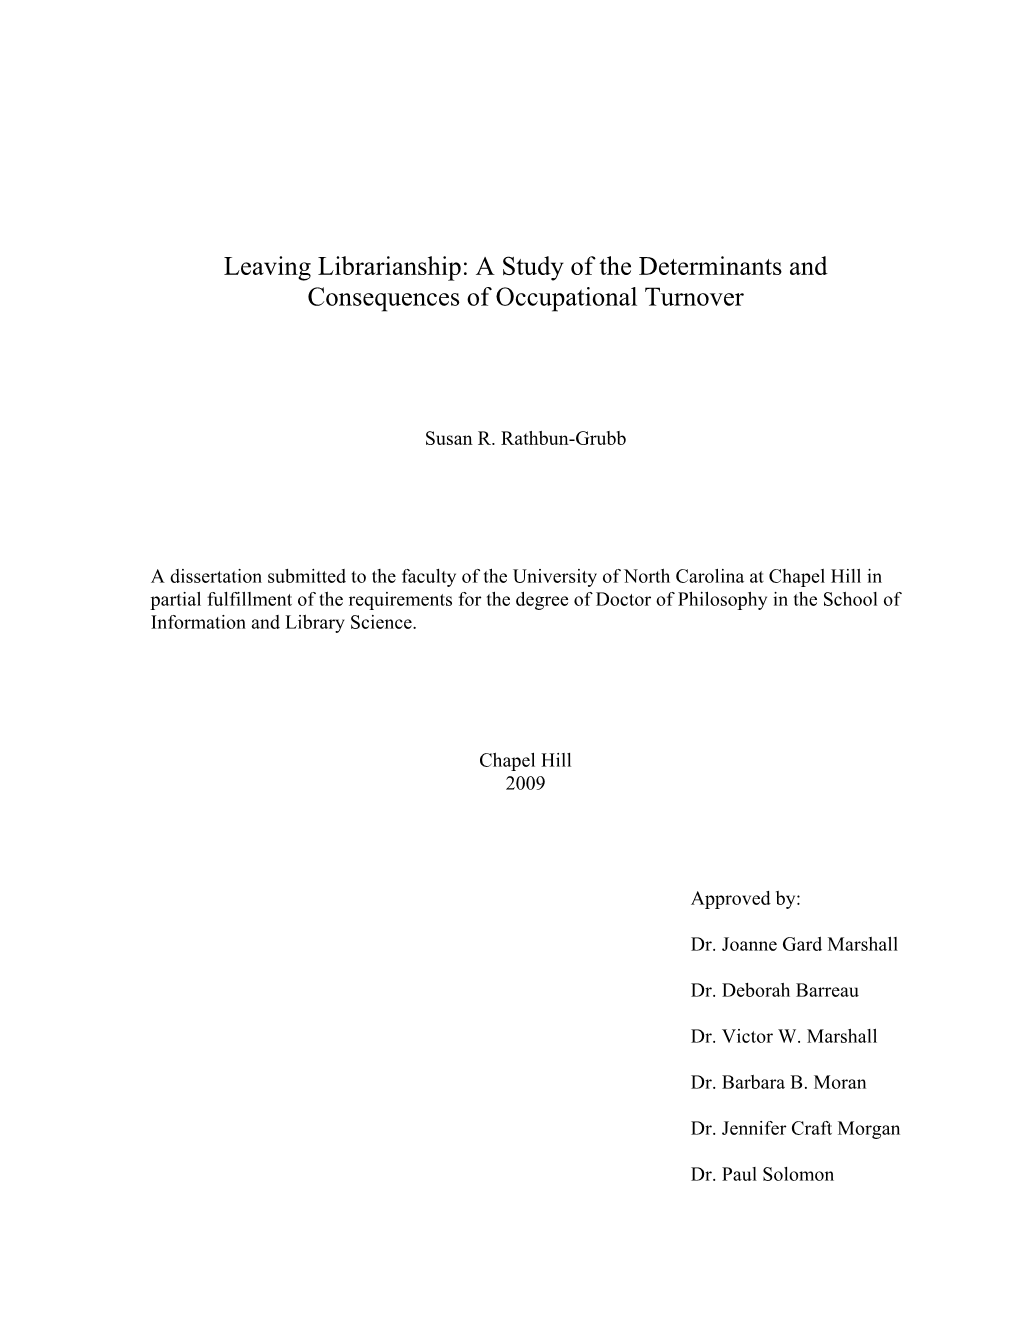 Leaving Librarianship: a Study of the Determinants and Consequences of Occupational Turnover